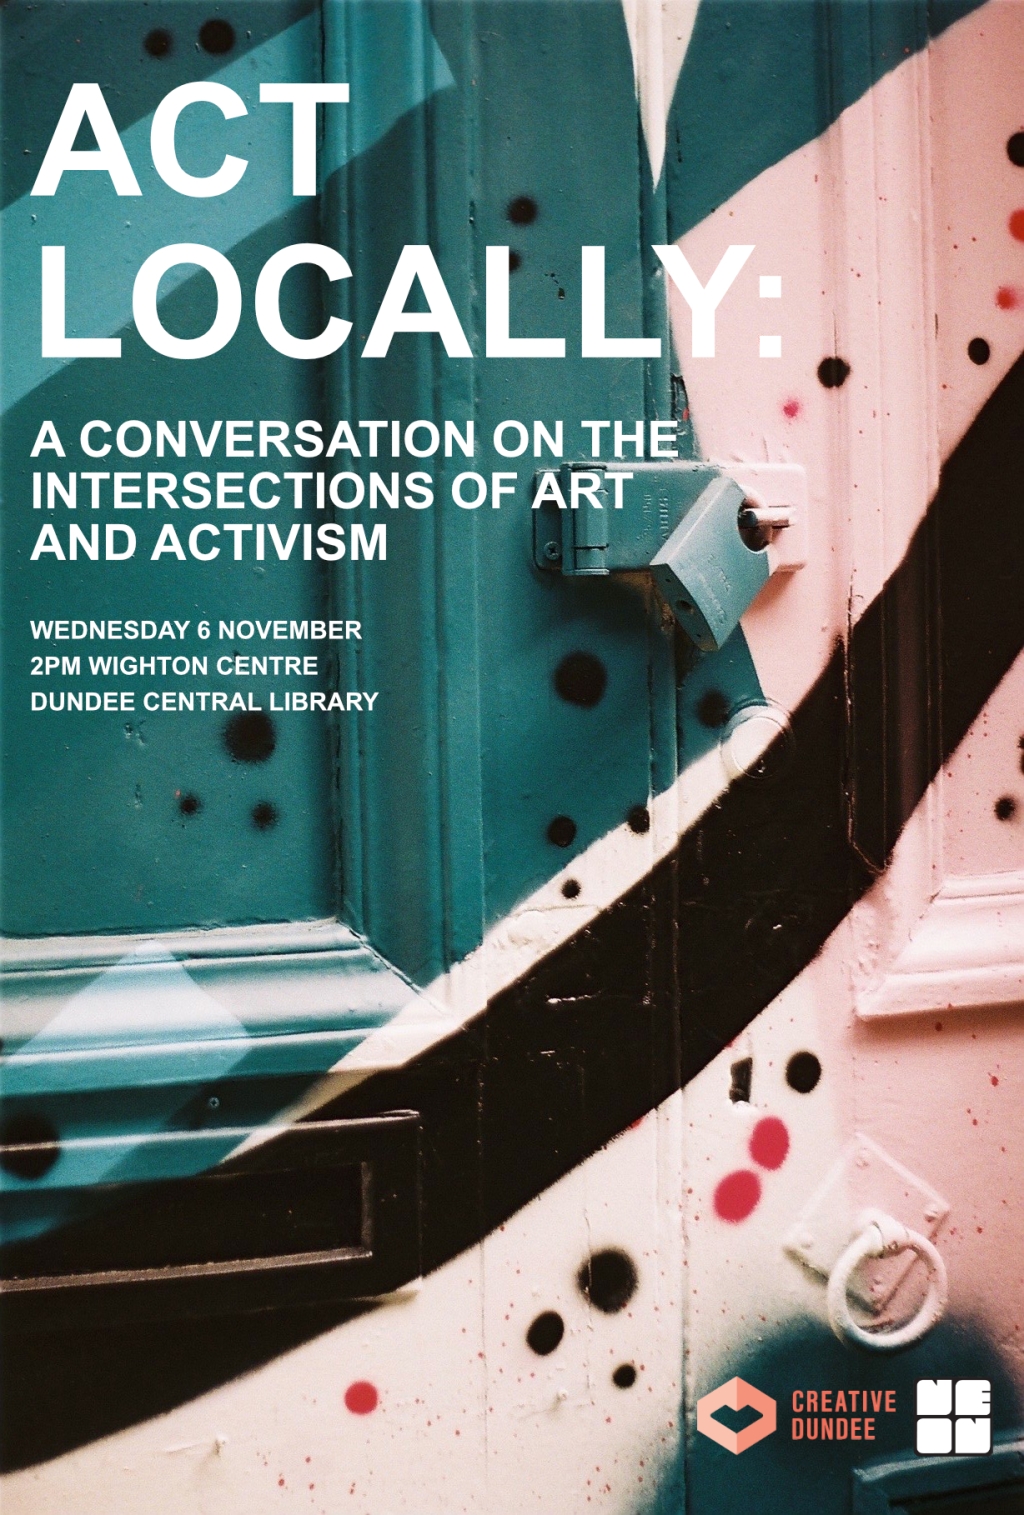 Act Locally with Creative Dundee